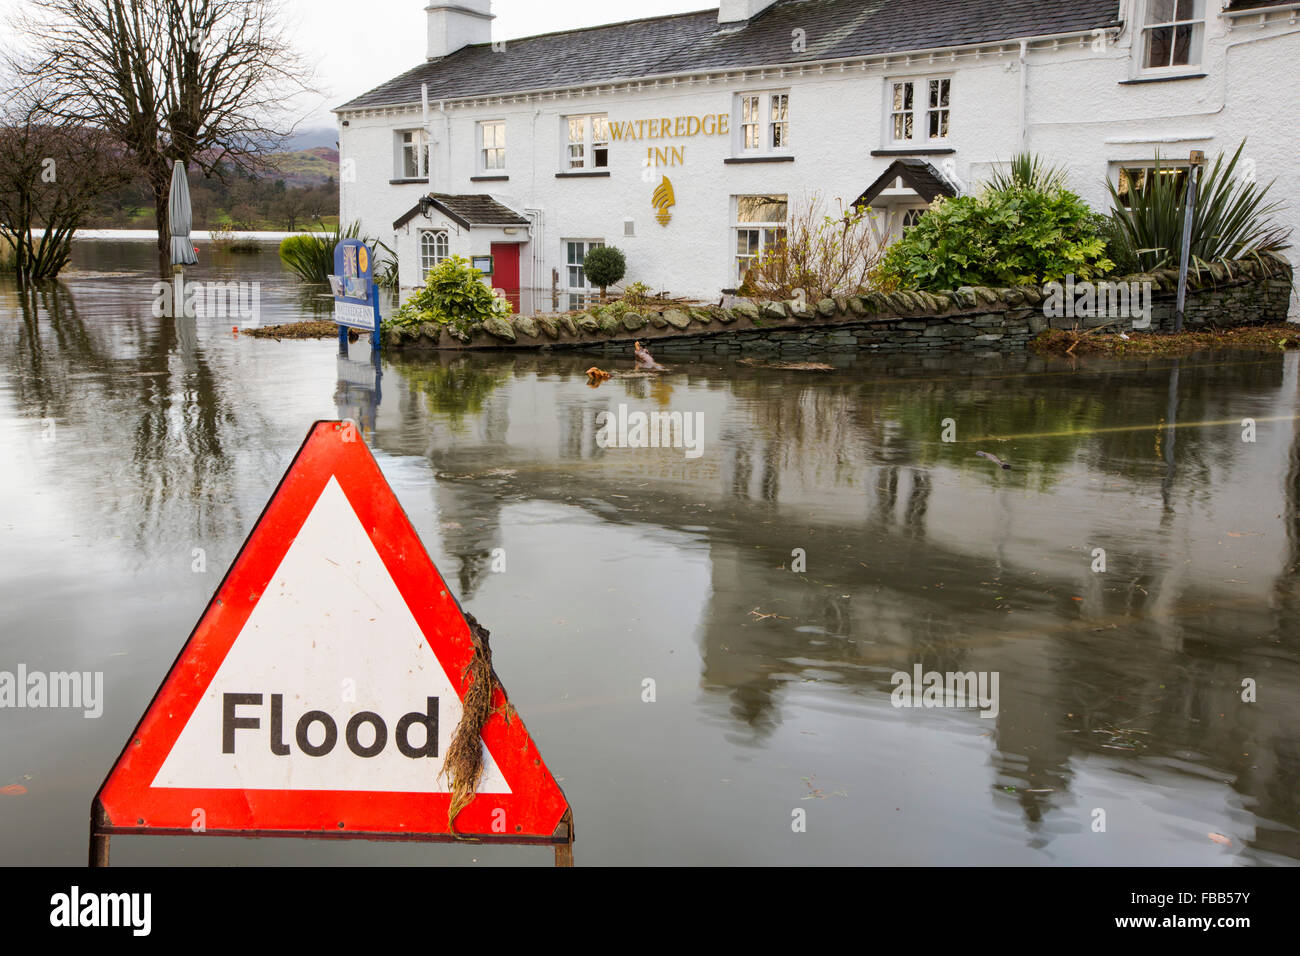 The Wateredge Inn in Ambleside, Lake District, UK, surrounded by flood water from Lake Windermere bursting its banks in late November 2015. Stock Photo